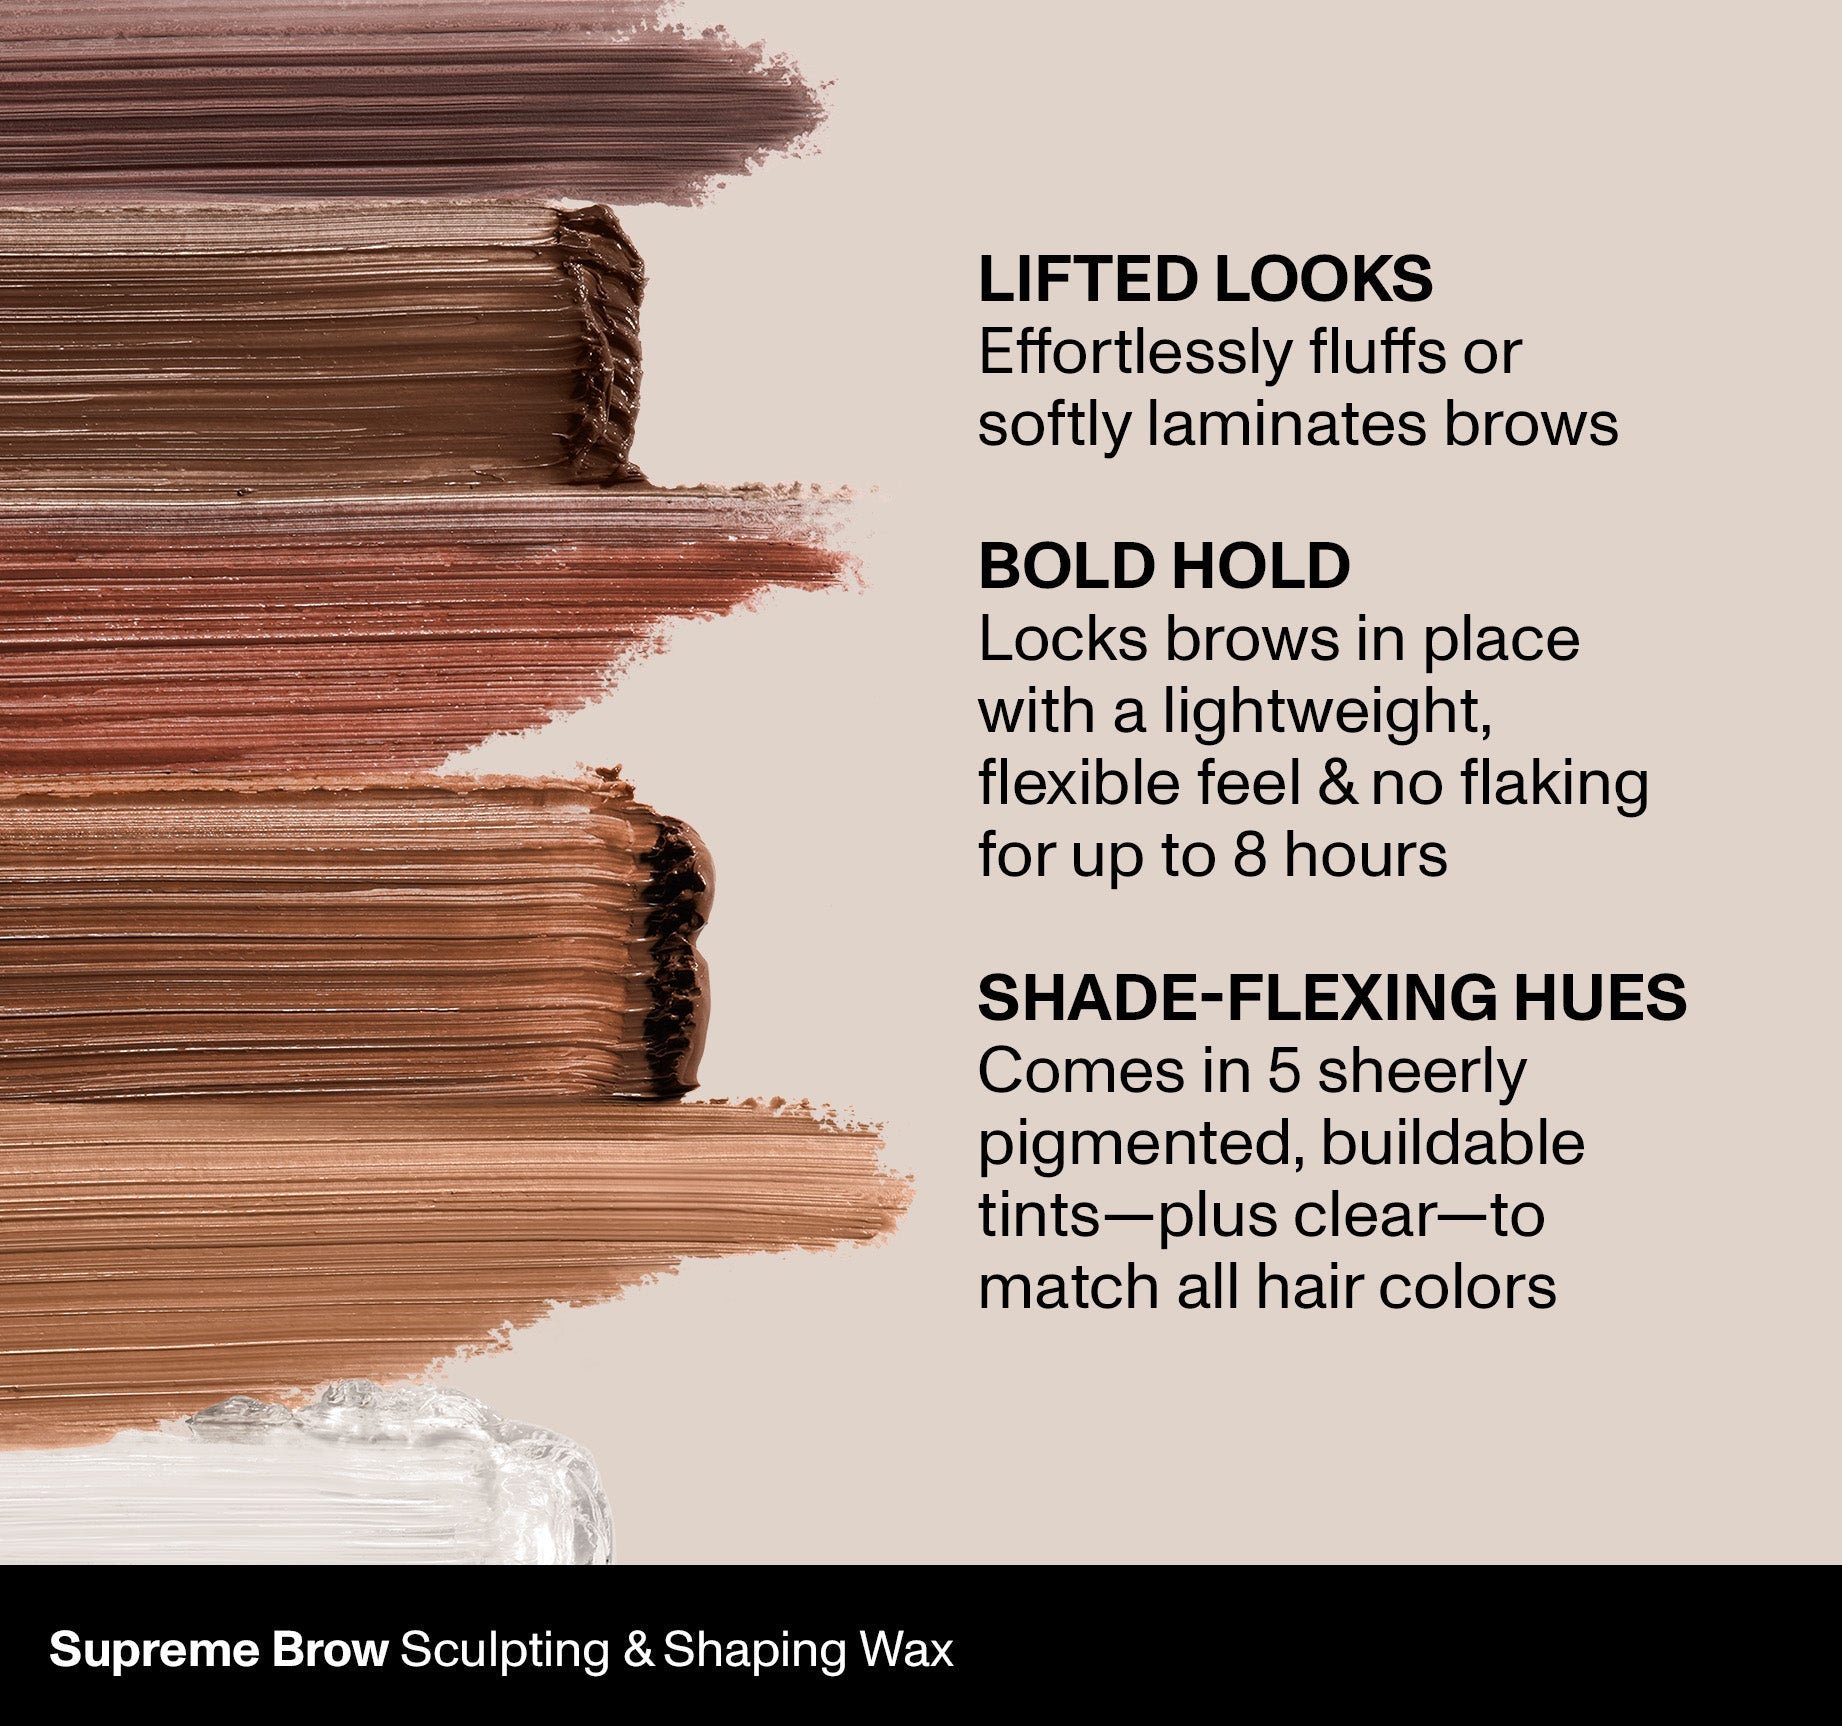 Supreme Brow Sculpting And Shaping Wax - Latte - Image 4